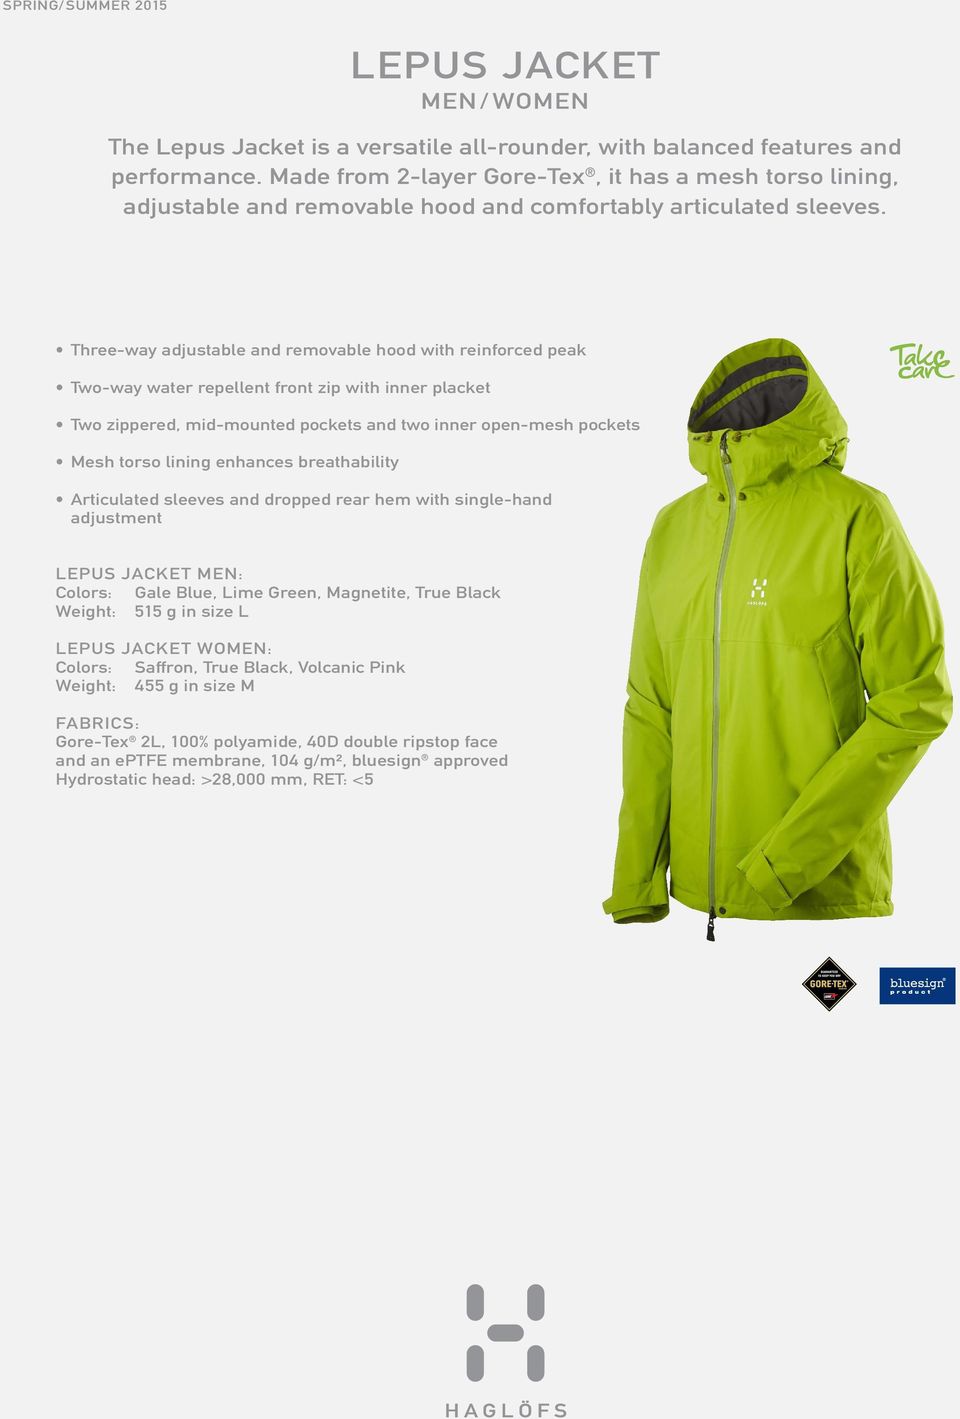 Three-way adjustable and removable hood with reinforced peak Two-way water repellent front zip with inner placket Two zippered, mid-mounted pockets and two inner open-mesh pockets Mesh torso lining